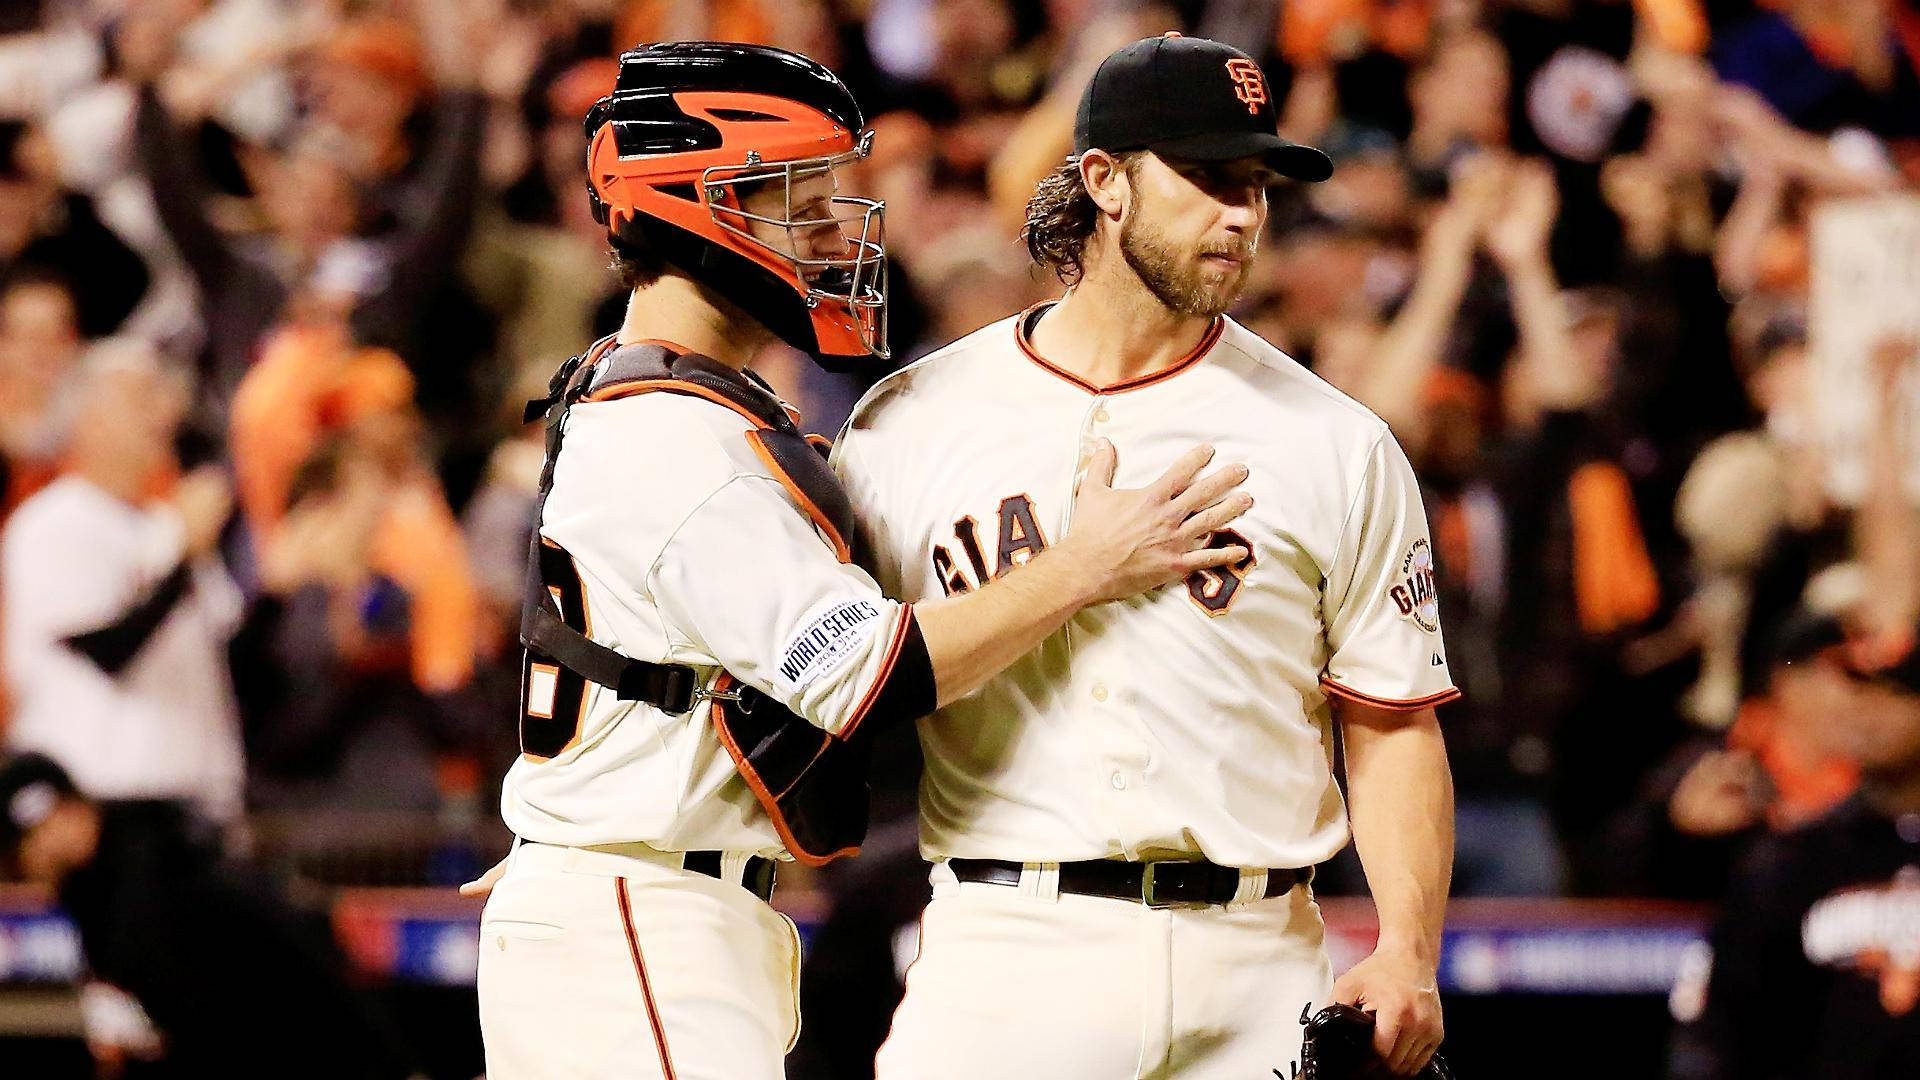 Madison Bumgarner With Catcher Wallpaper